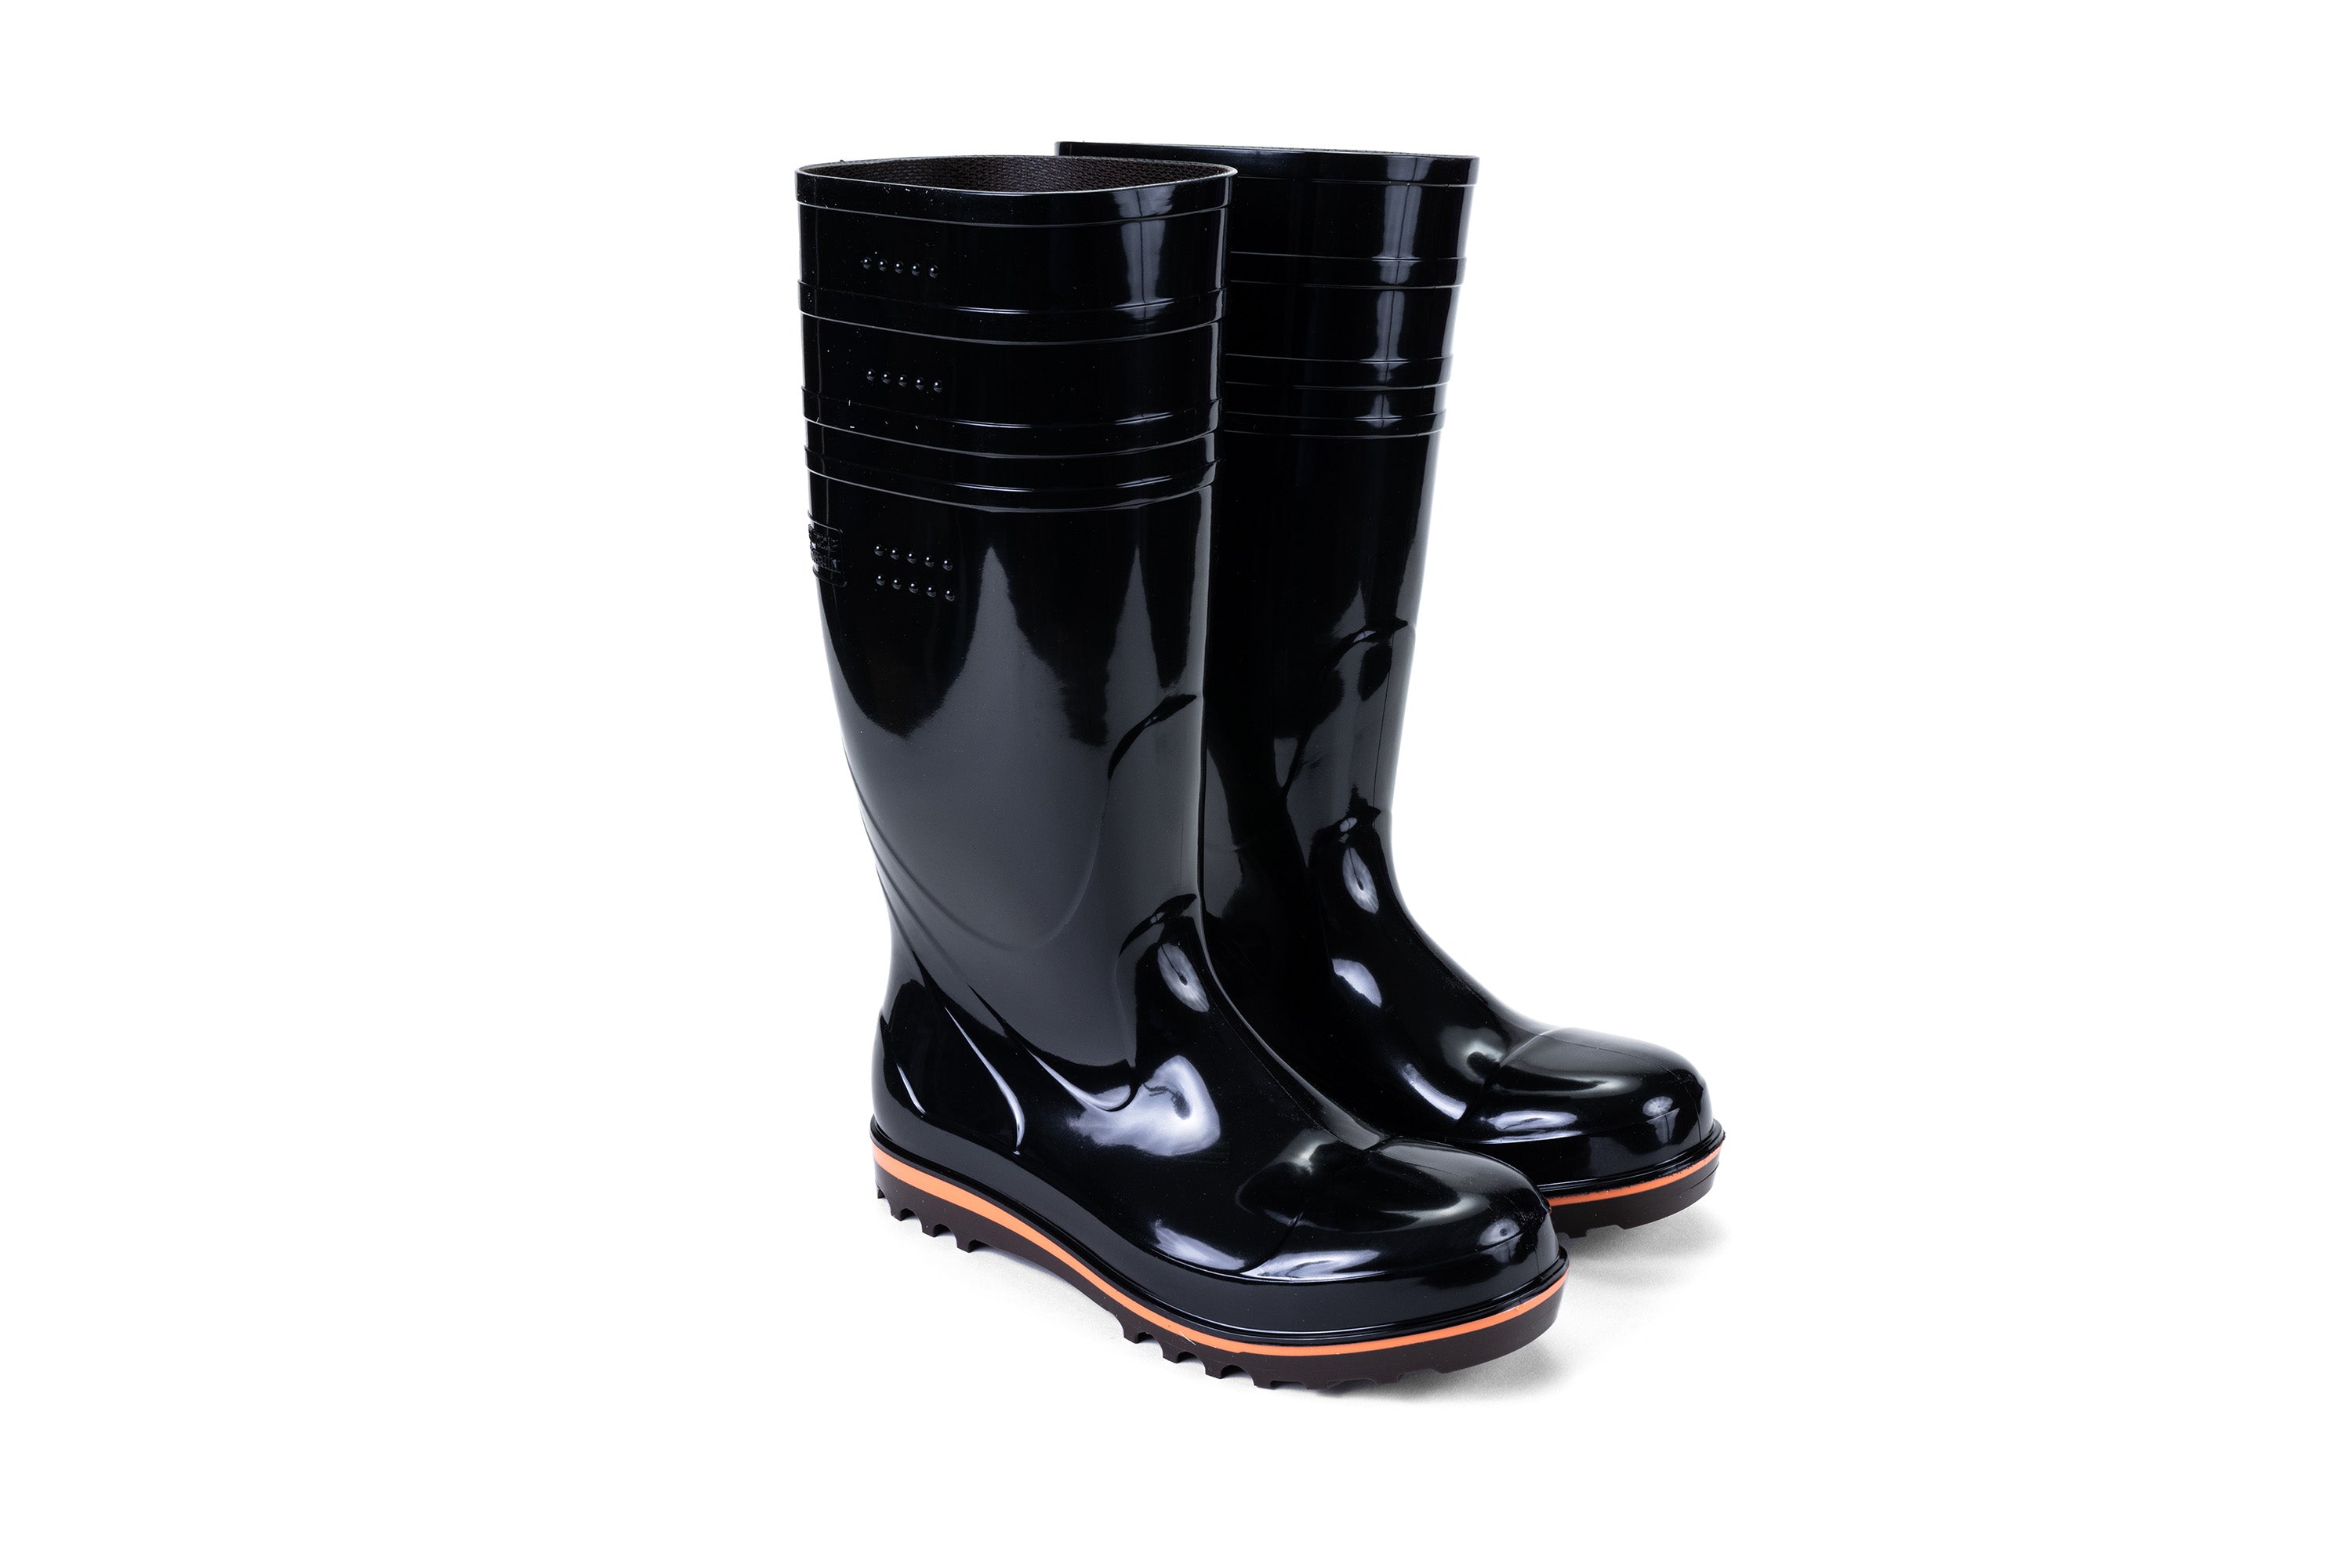 HB-500 Steel Toe Cap Rain Boots - Special Design for Kitchen (Japan Made with New Technology)